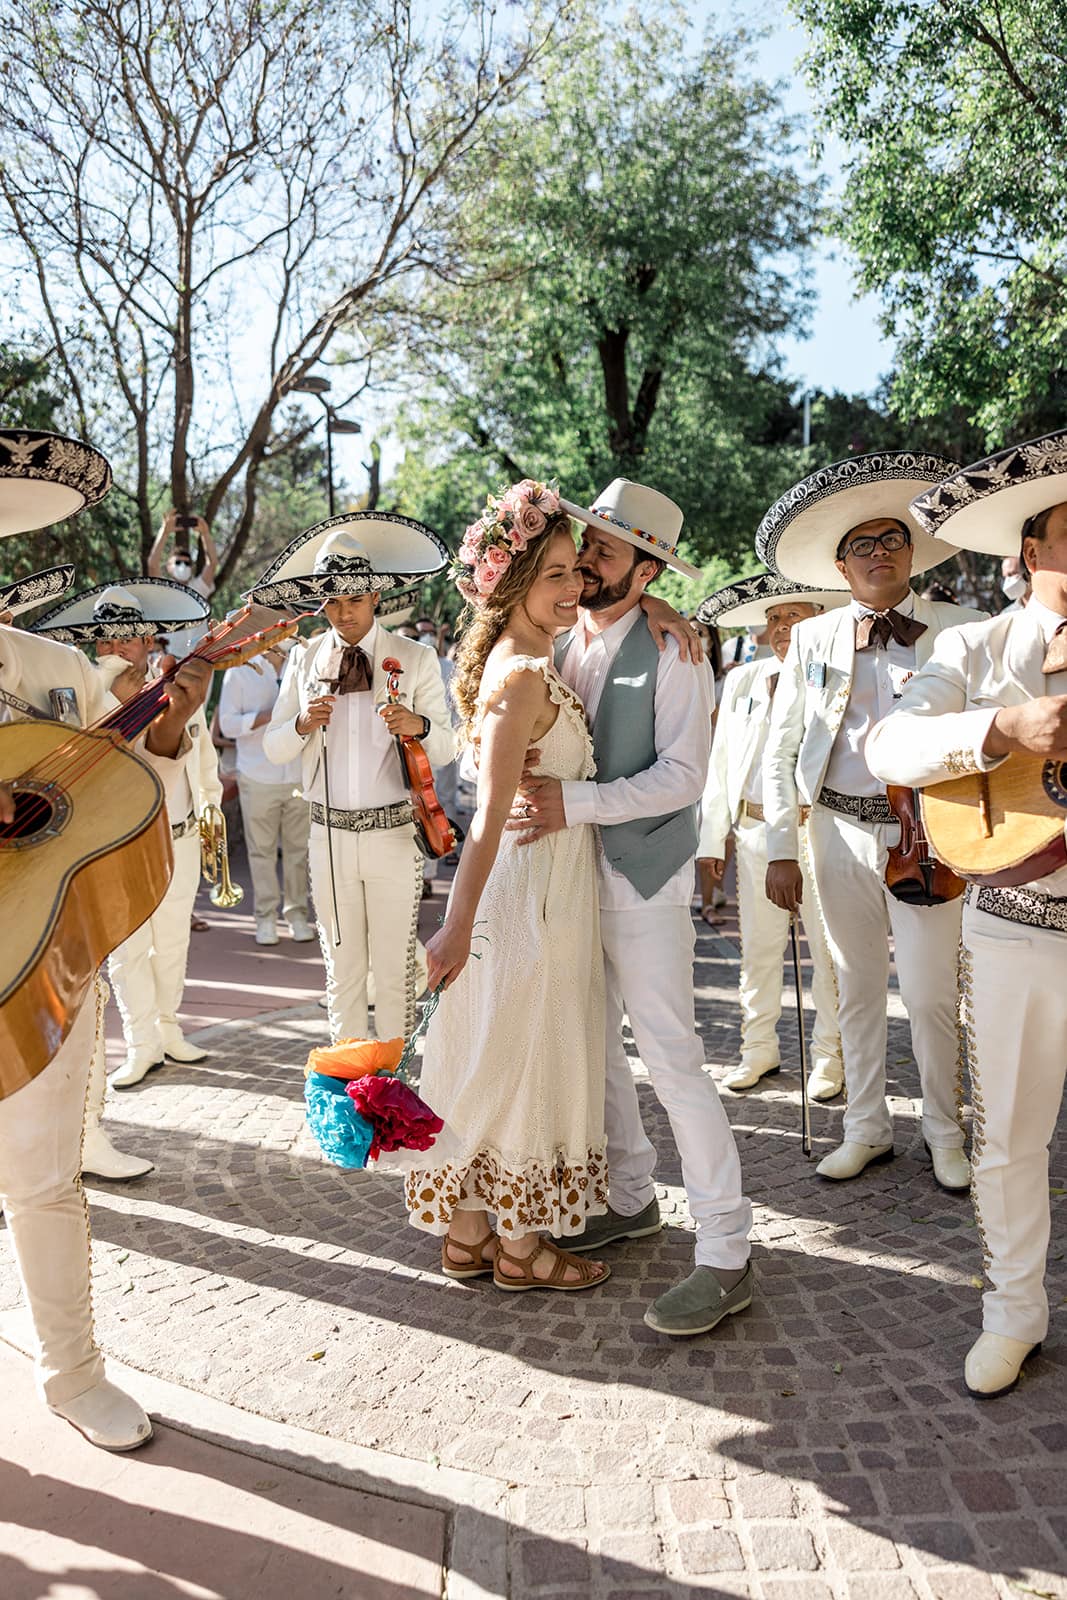 Bride and groom kiss while mariachi band plays in a park